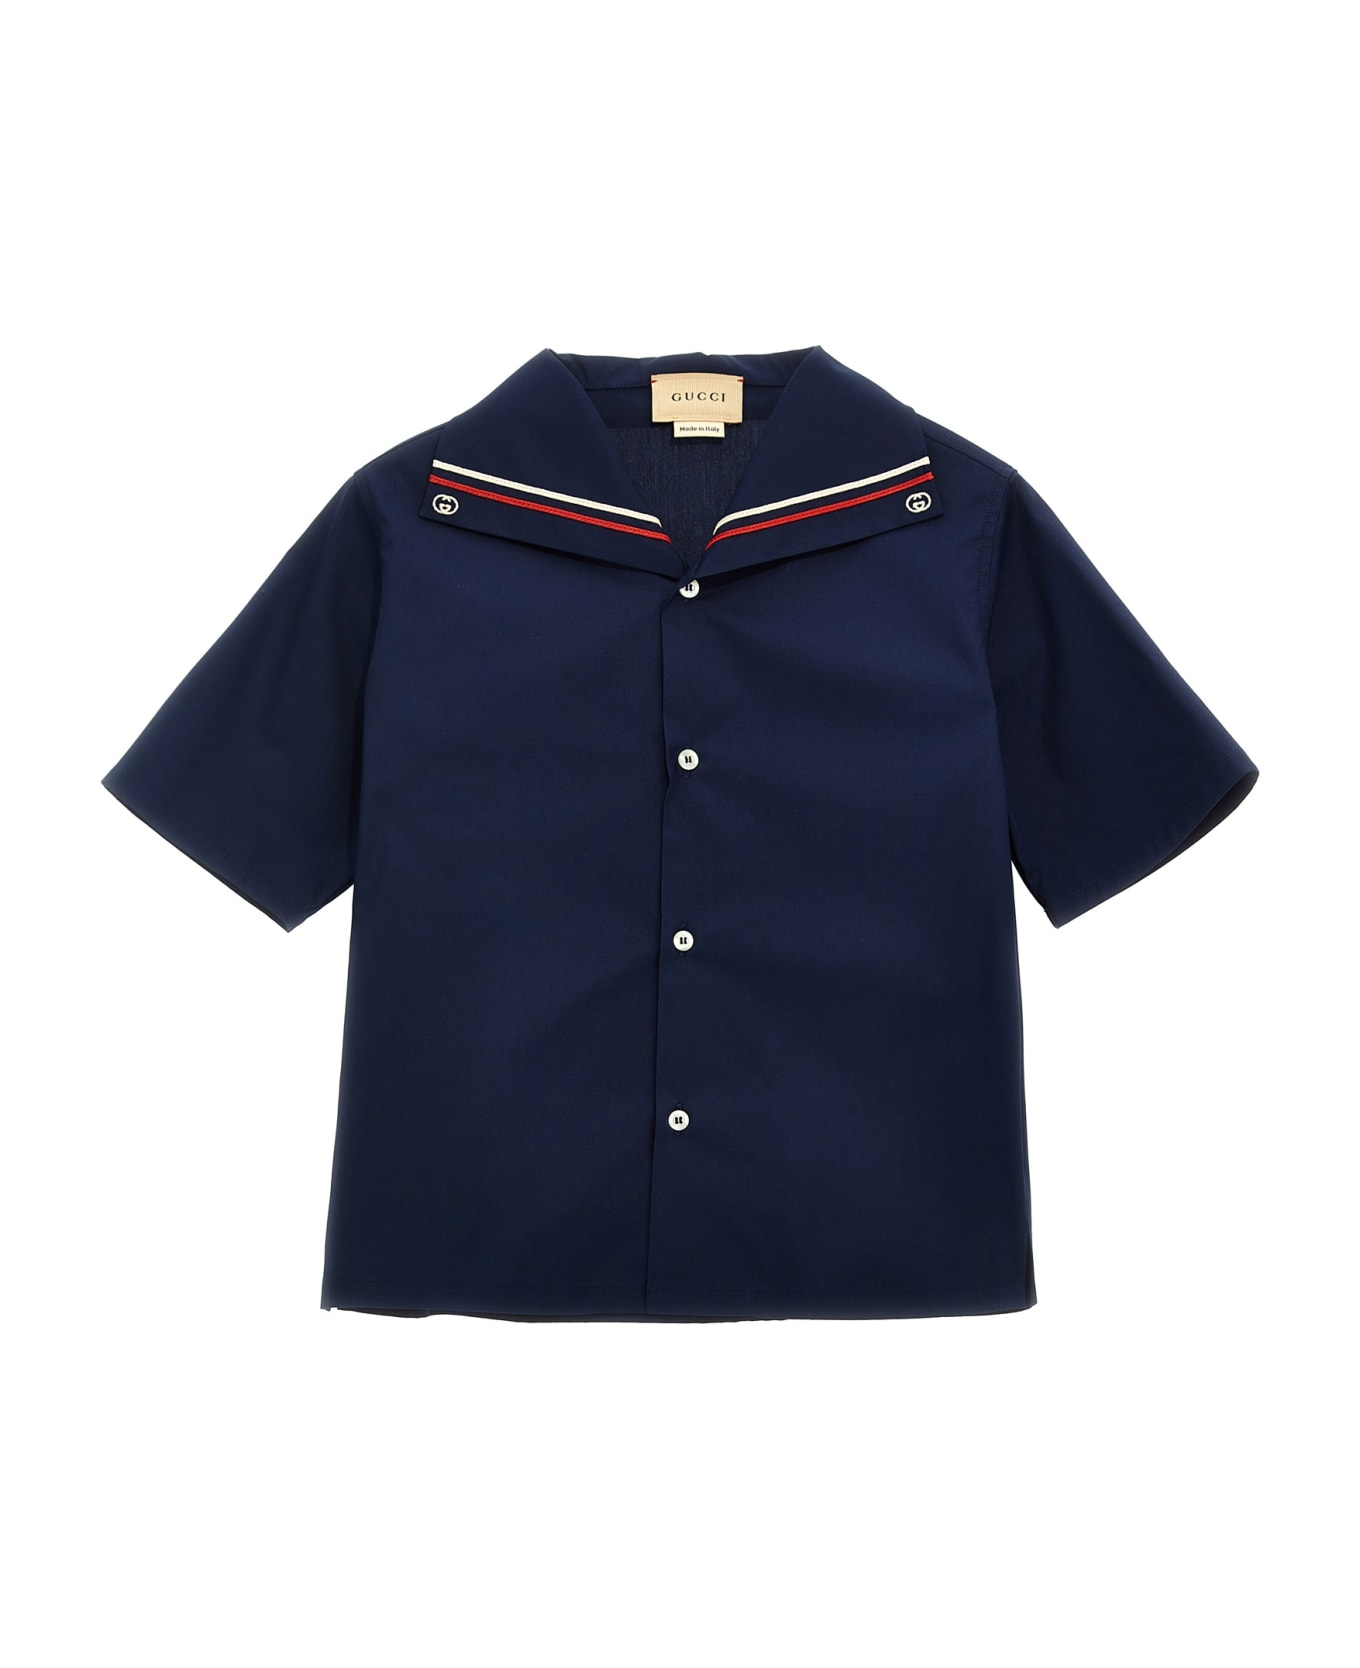 Gucci Collar Embroidery Shirt - Blue